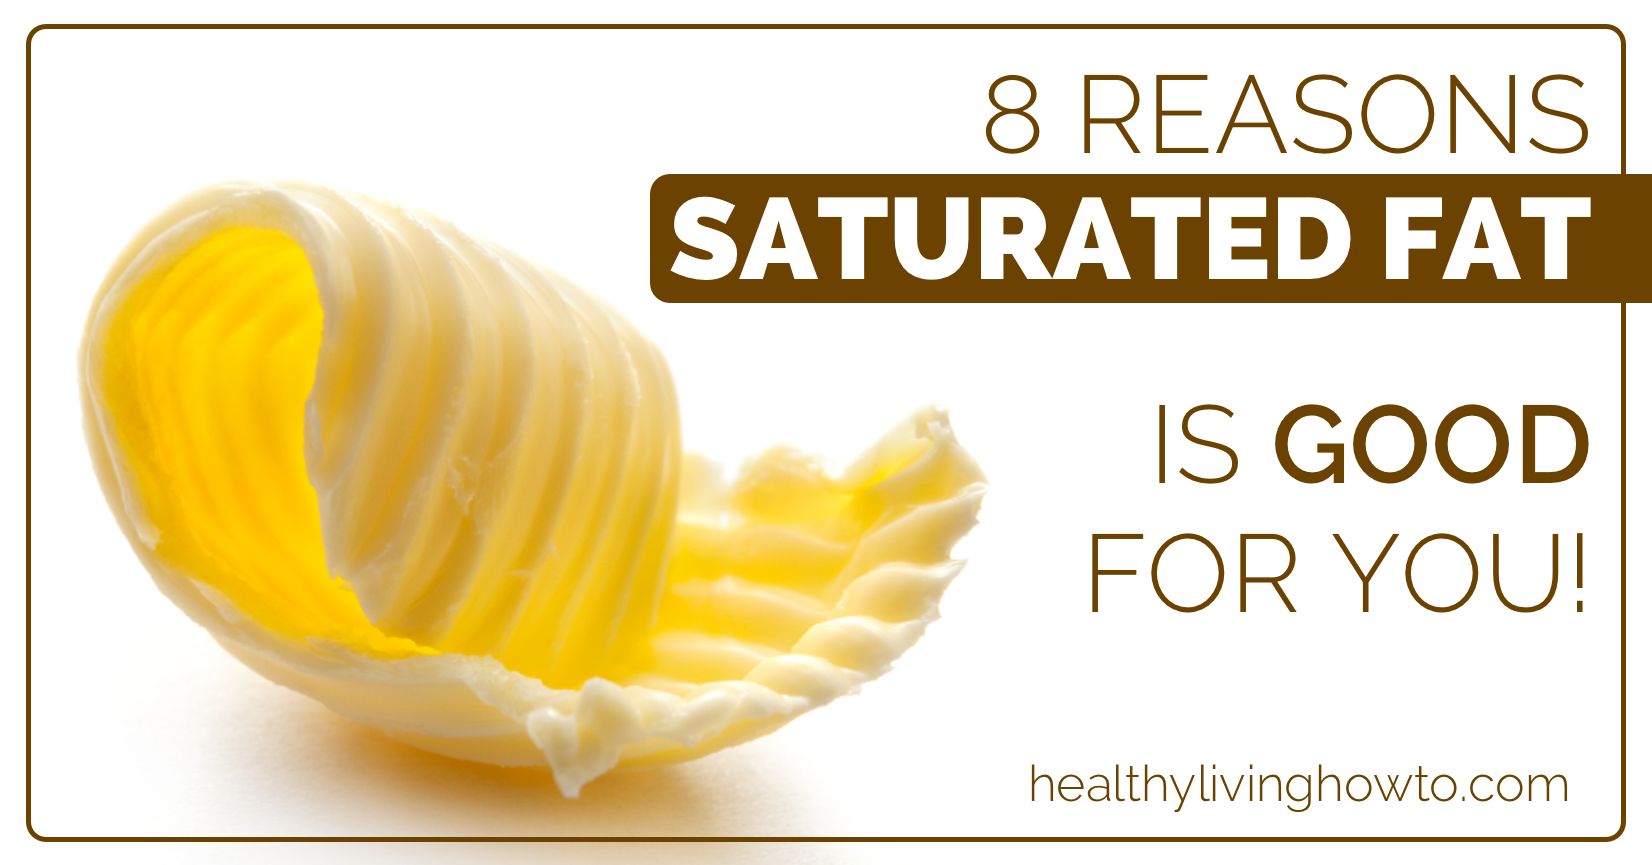 8 Reasons Saturated Fat Is Good For You | healthylivinghowto.com